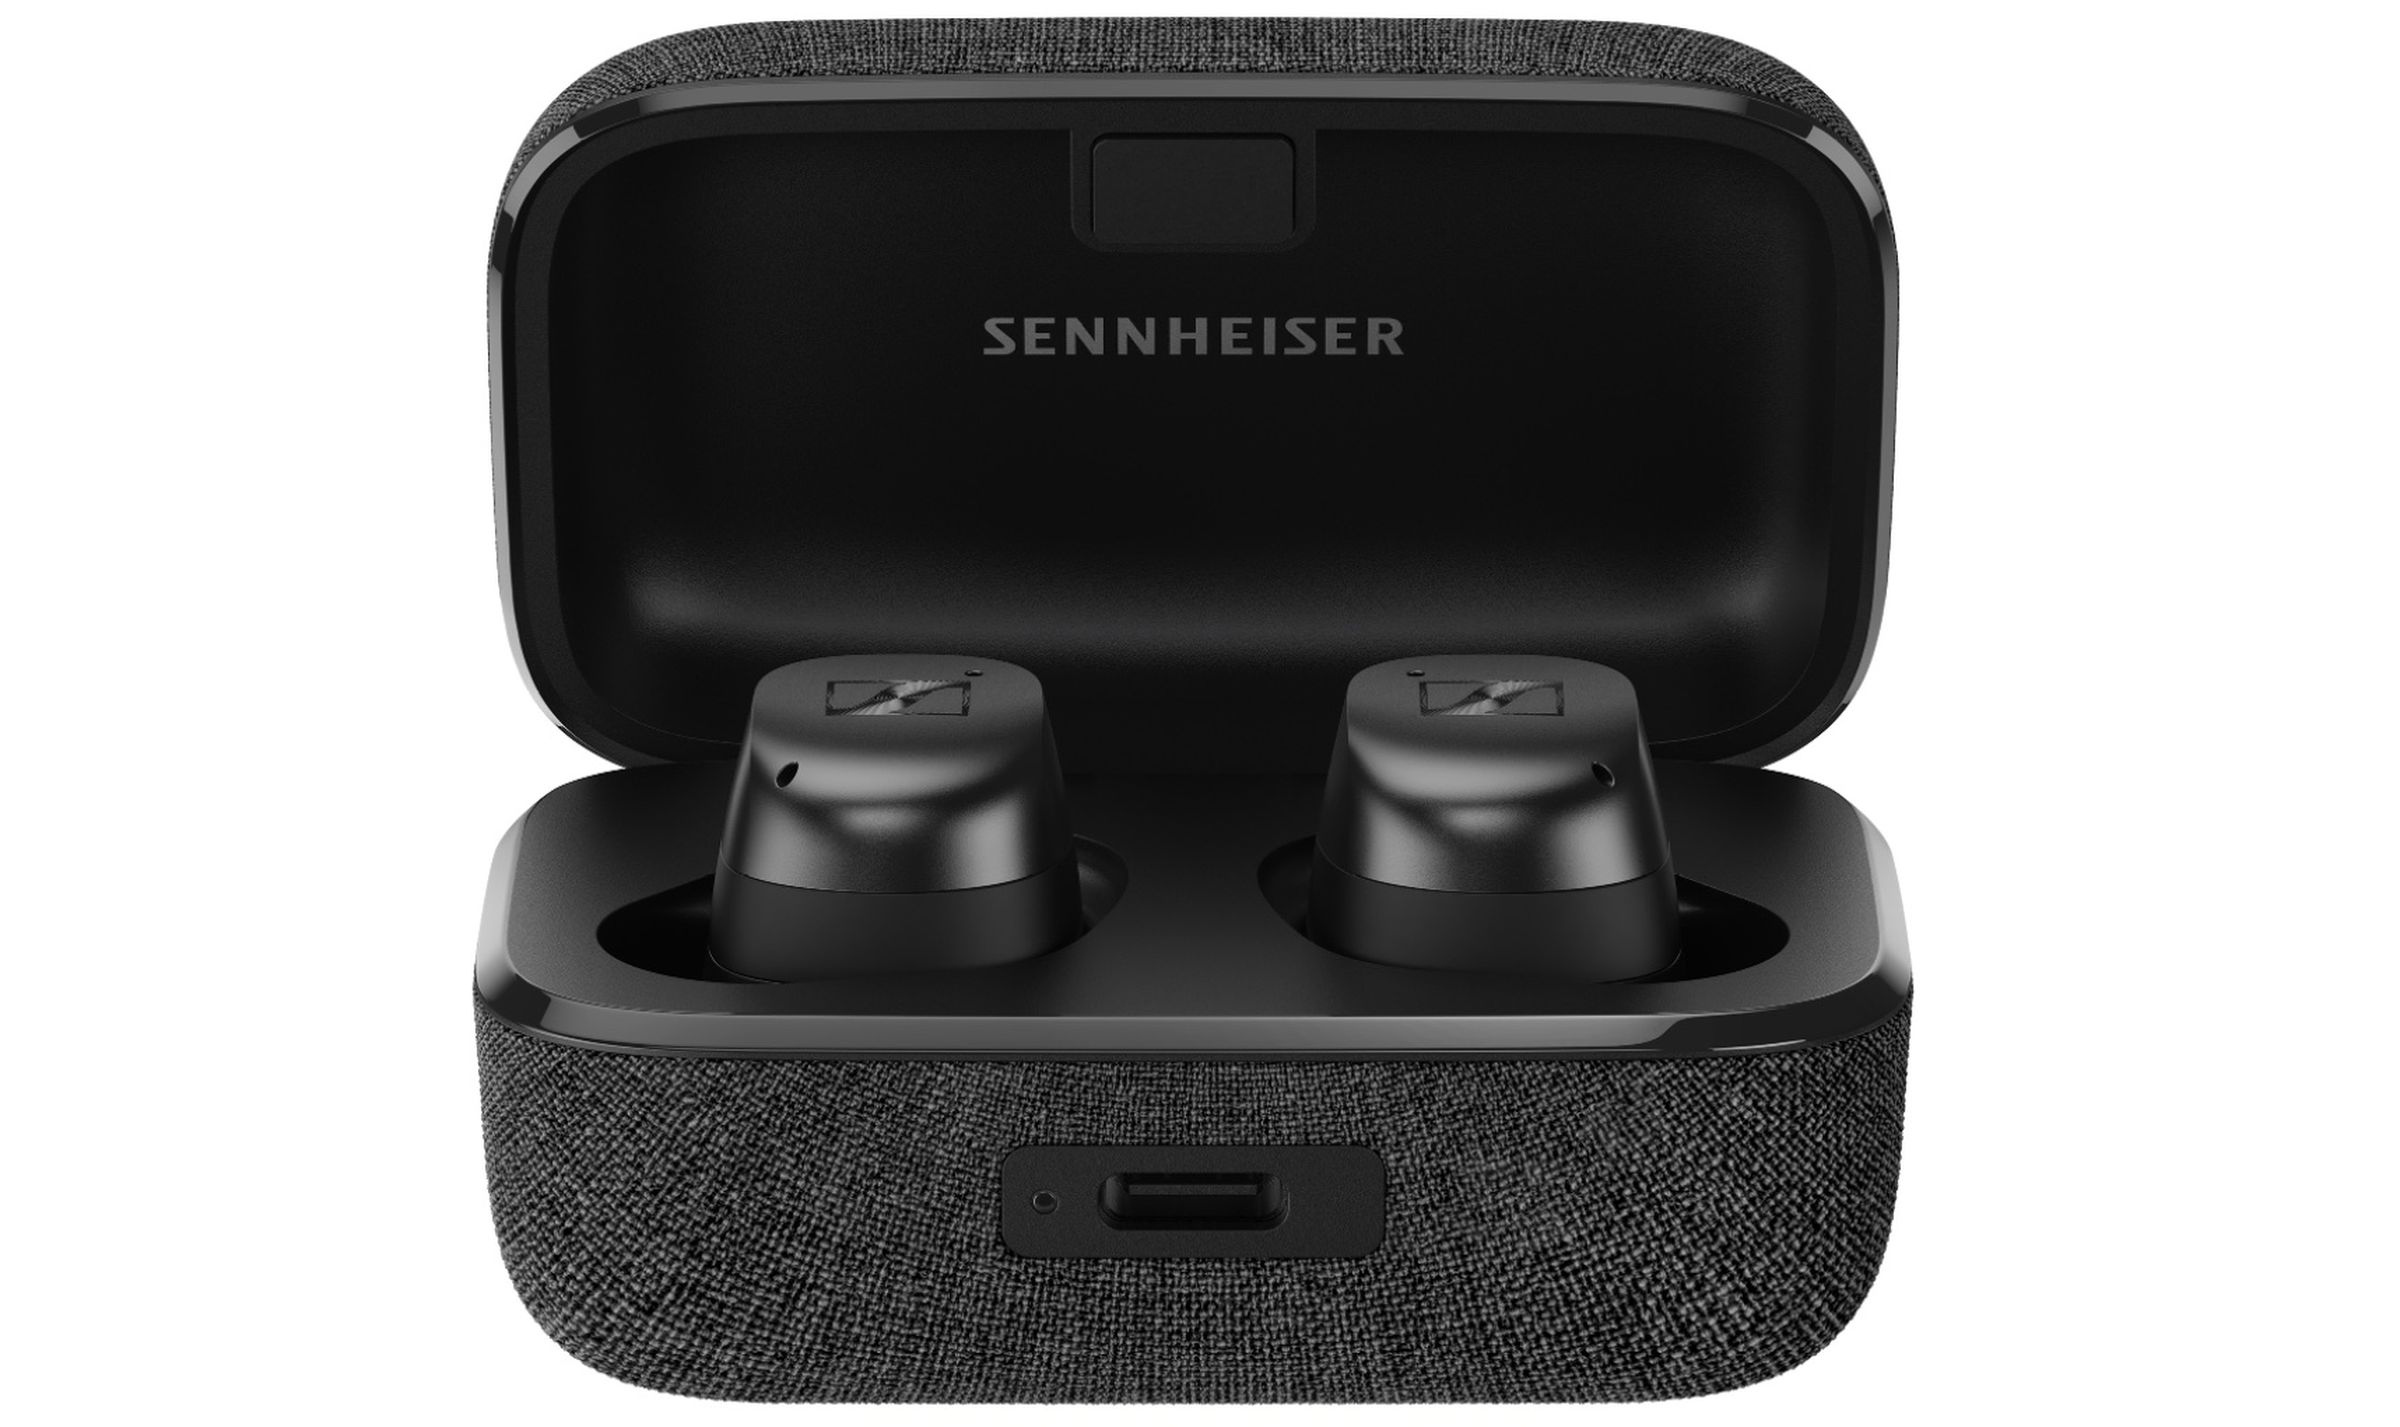 Sennheiser’s new flagship buds move the USB-C port to the front of the case.